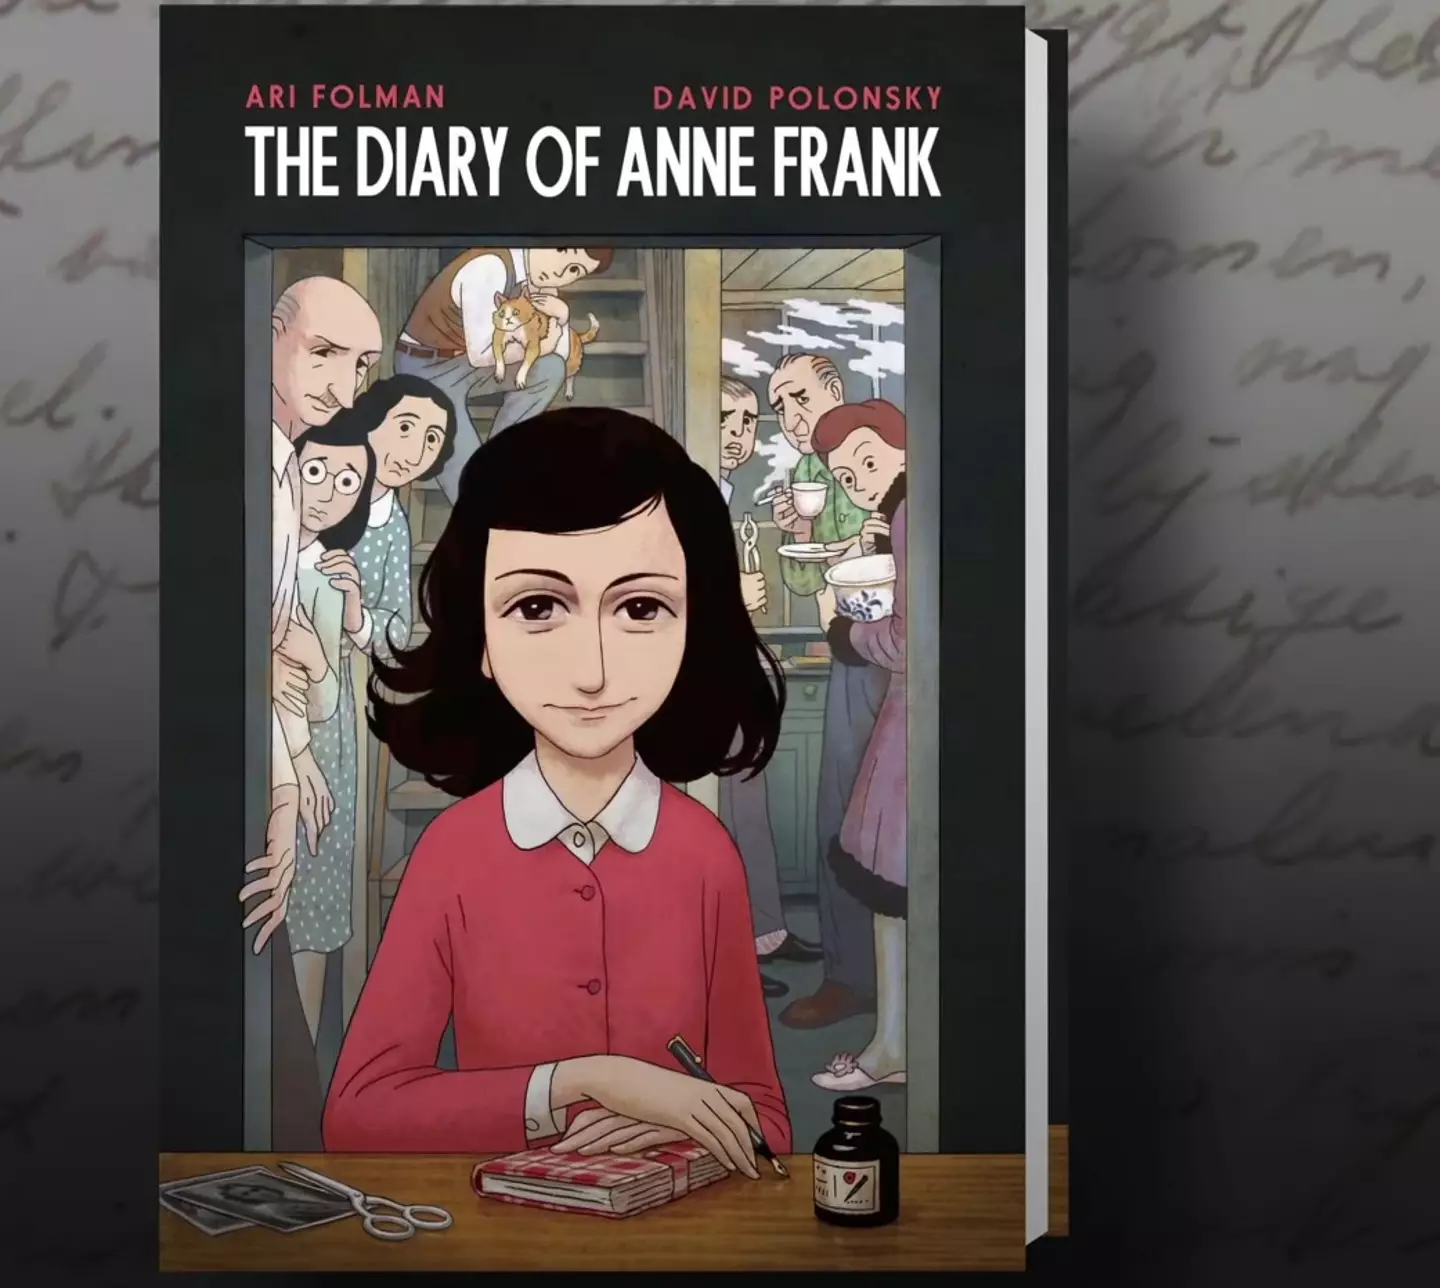 The banned adaptation is a graphic novel of Anne Frank's diary.